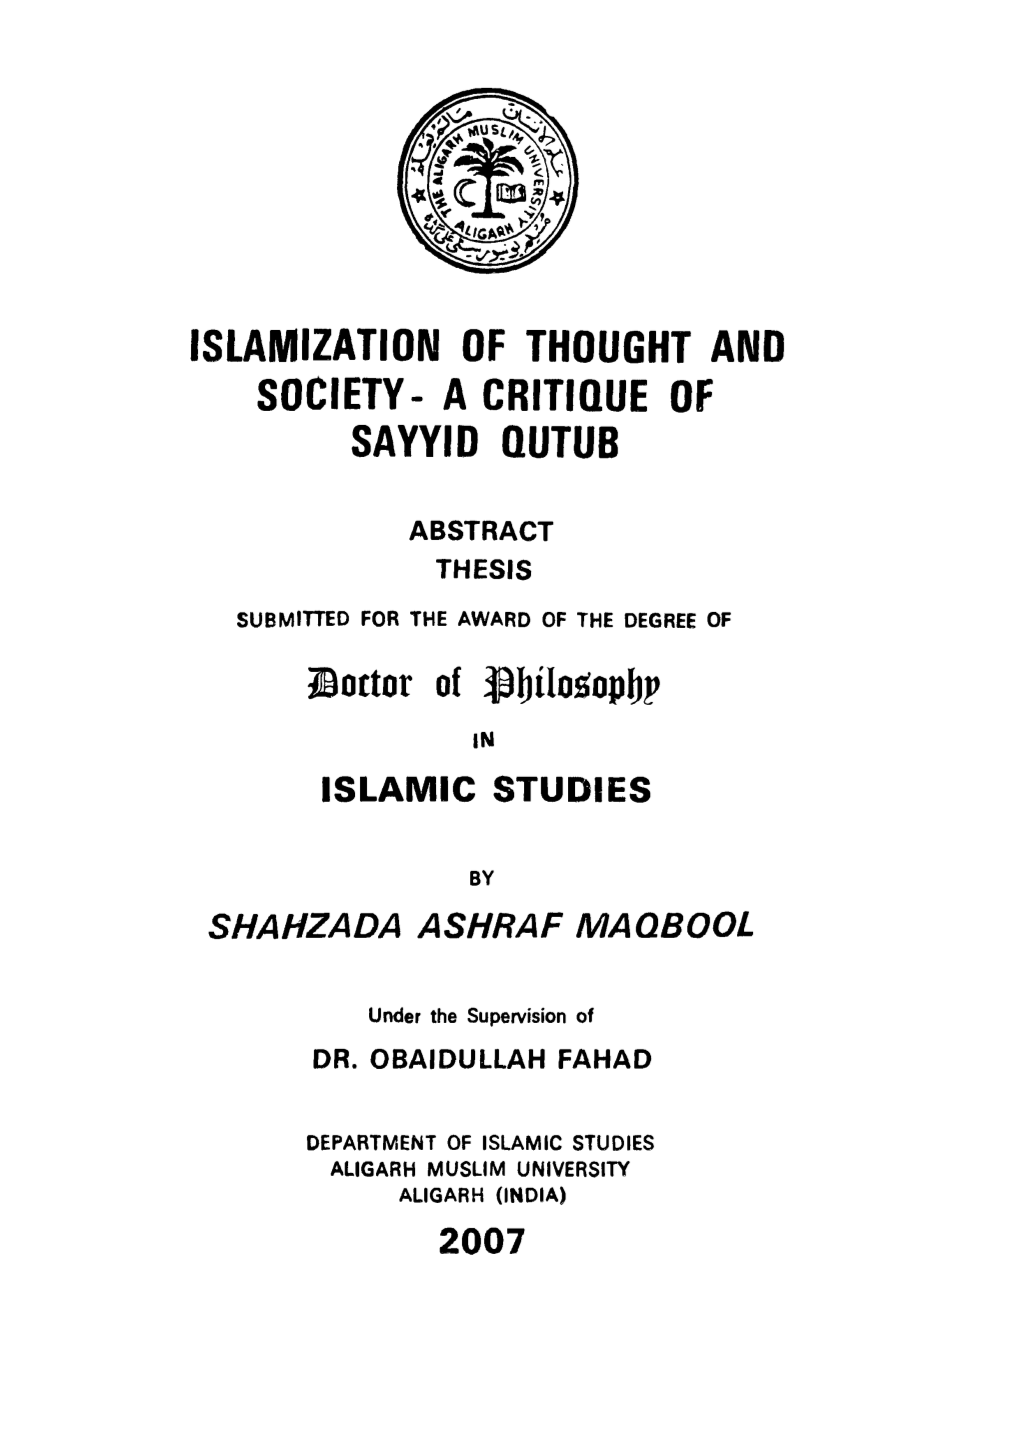 Islamization of Thought and Society- a Critique of Sayyid Qutub